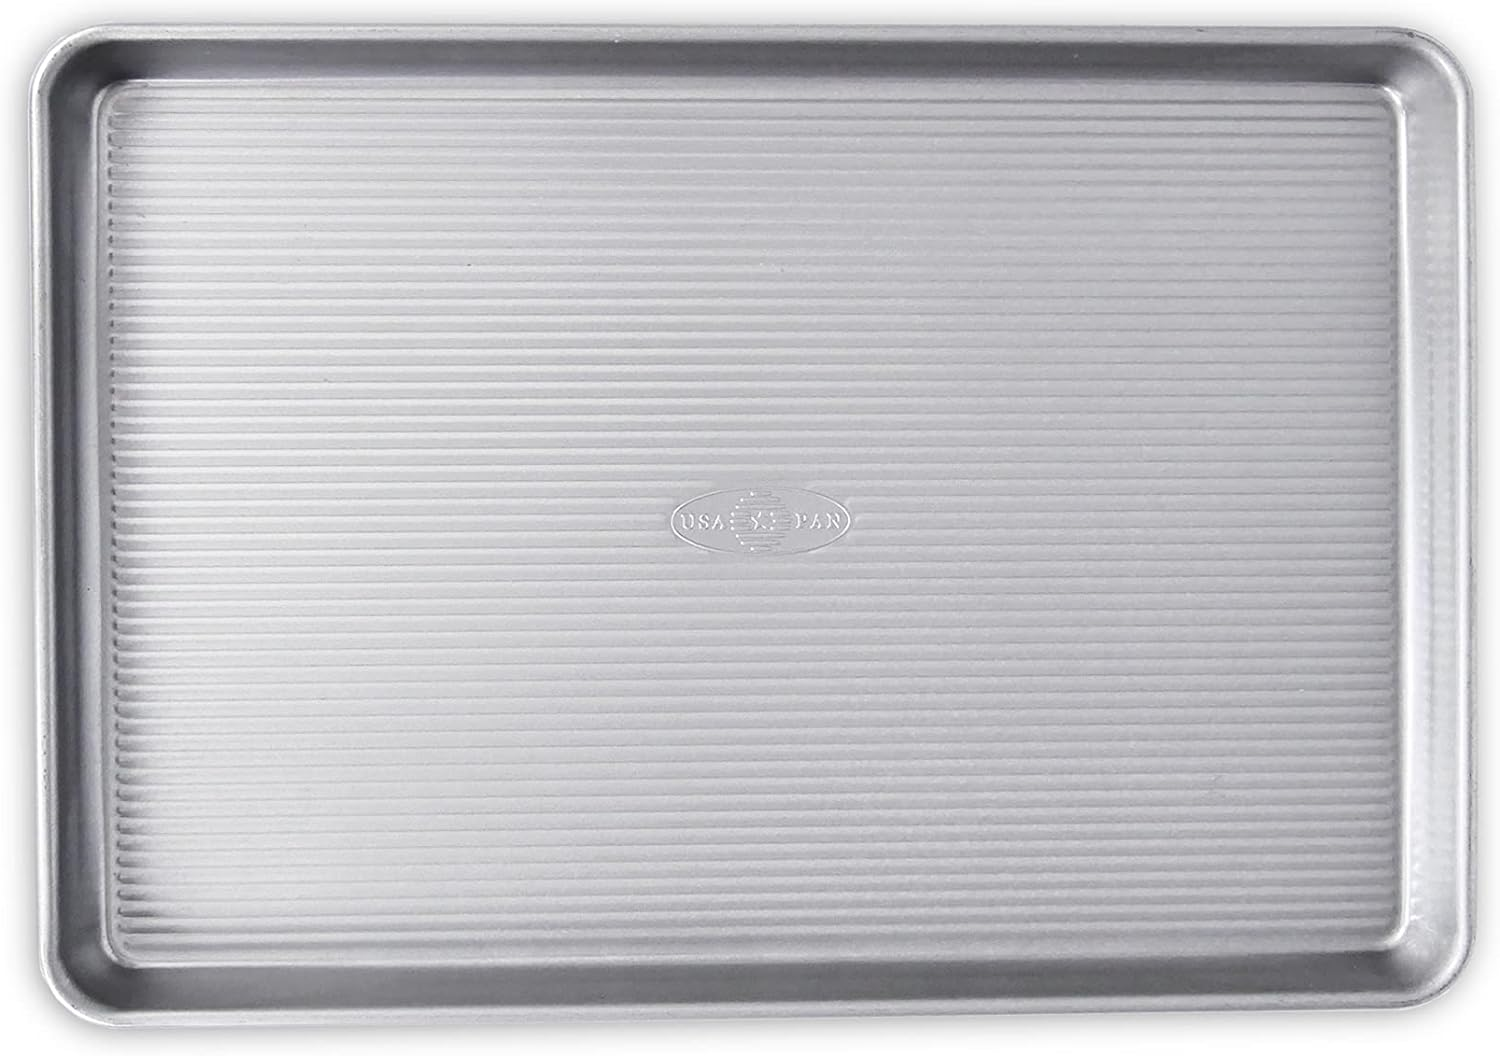 Amazon.com: USA Pan Bakeware Half Sheet Pan, Warp Resistant Nonstick Baking Pan, Made in the USA from Aluminized Steel 17 1/4 x12 1/4 x1: Jelly Roll Pans: Home & Kitchen $12.90